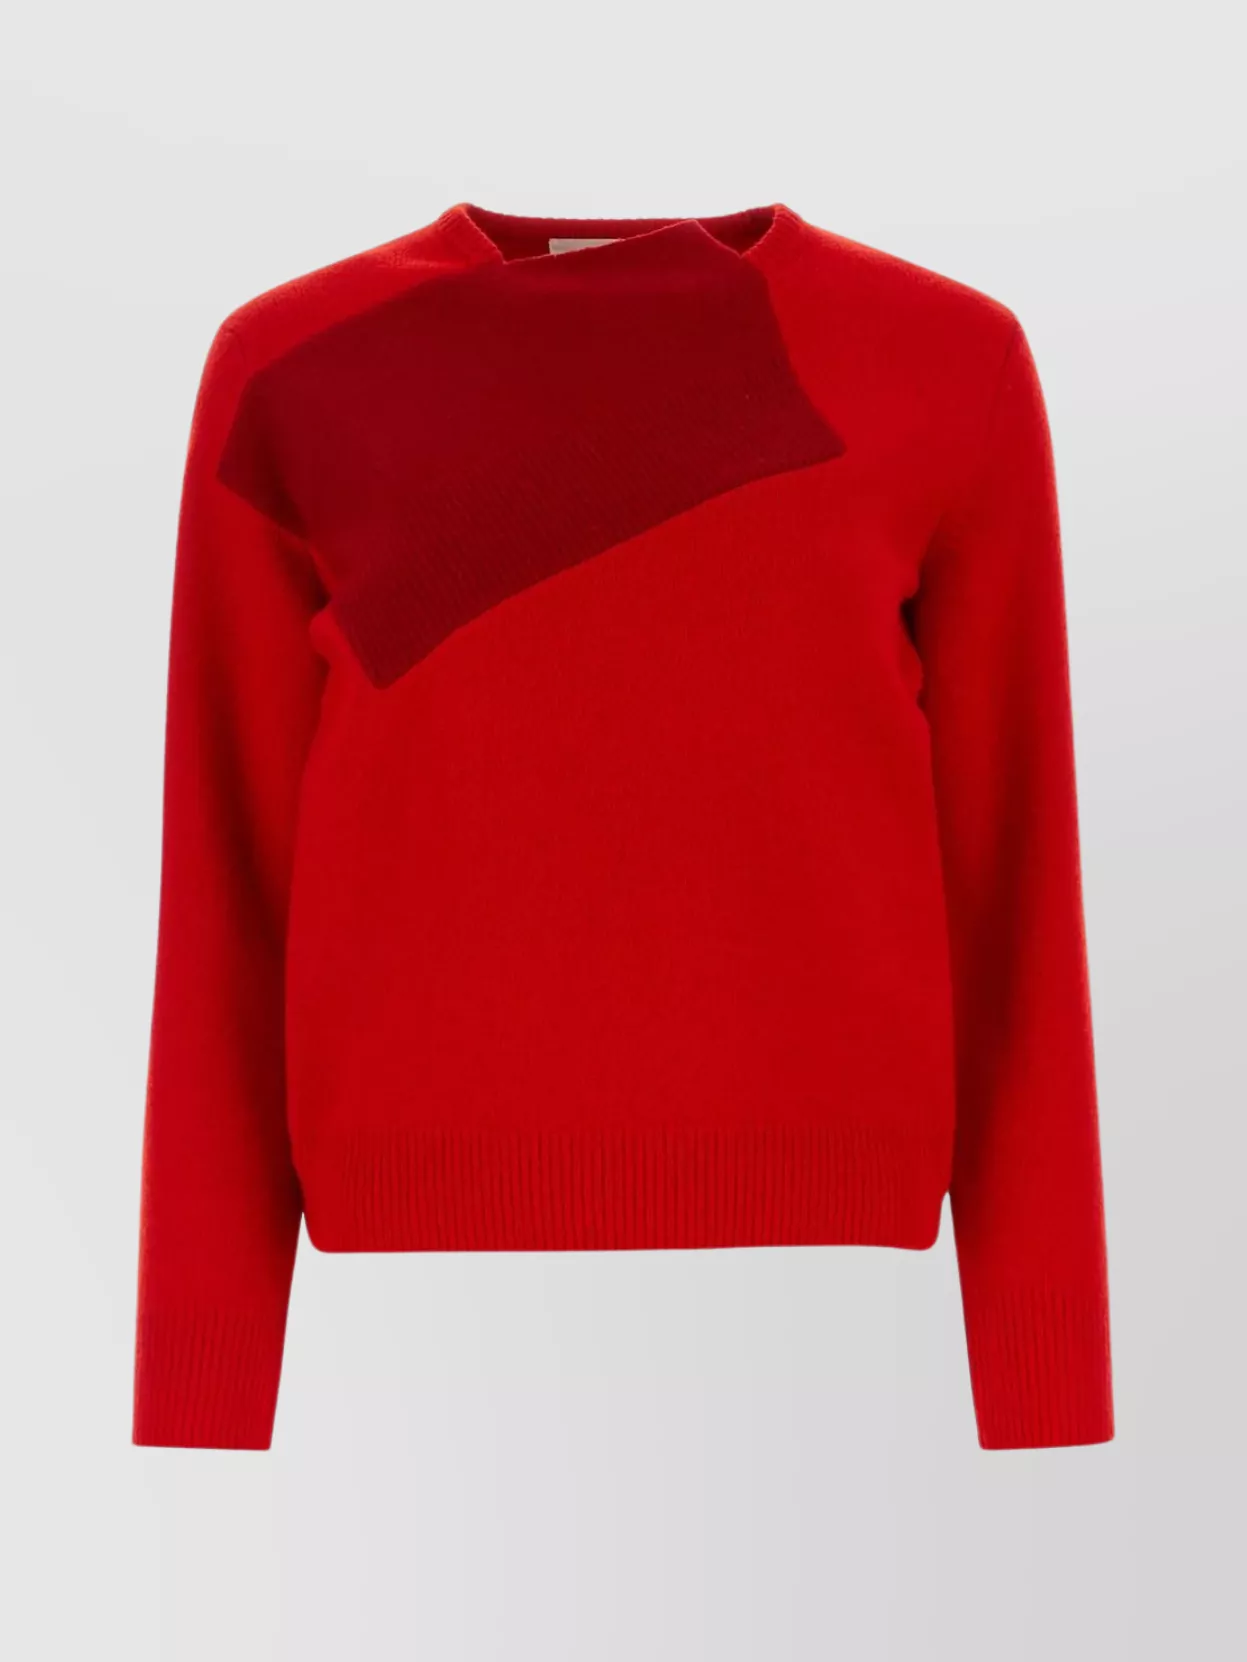 Shop The Row Enid Sweater Featuring Distinctive Neckline In Red